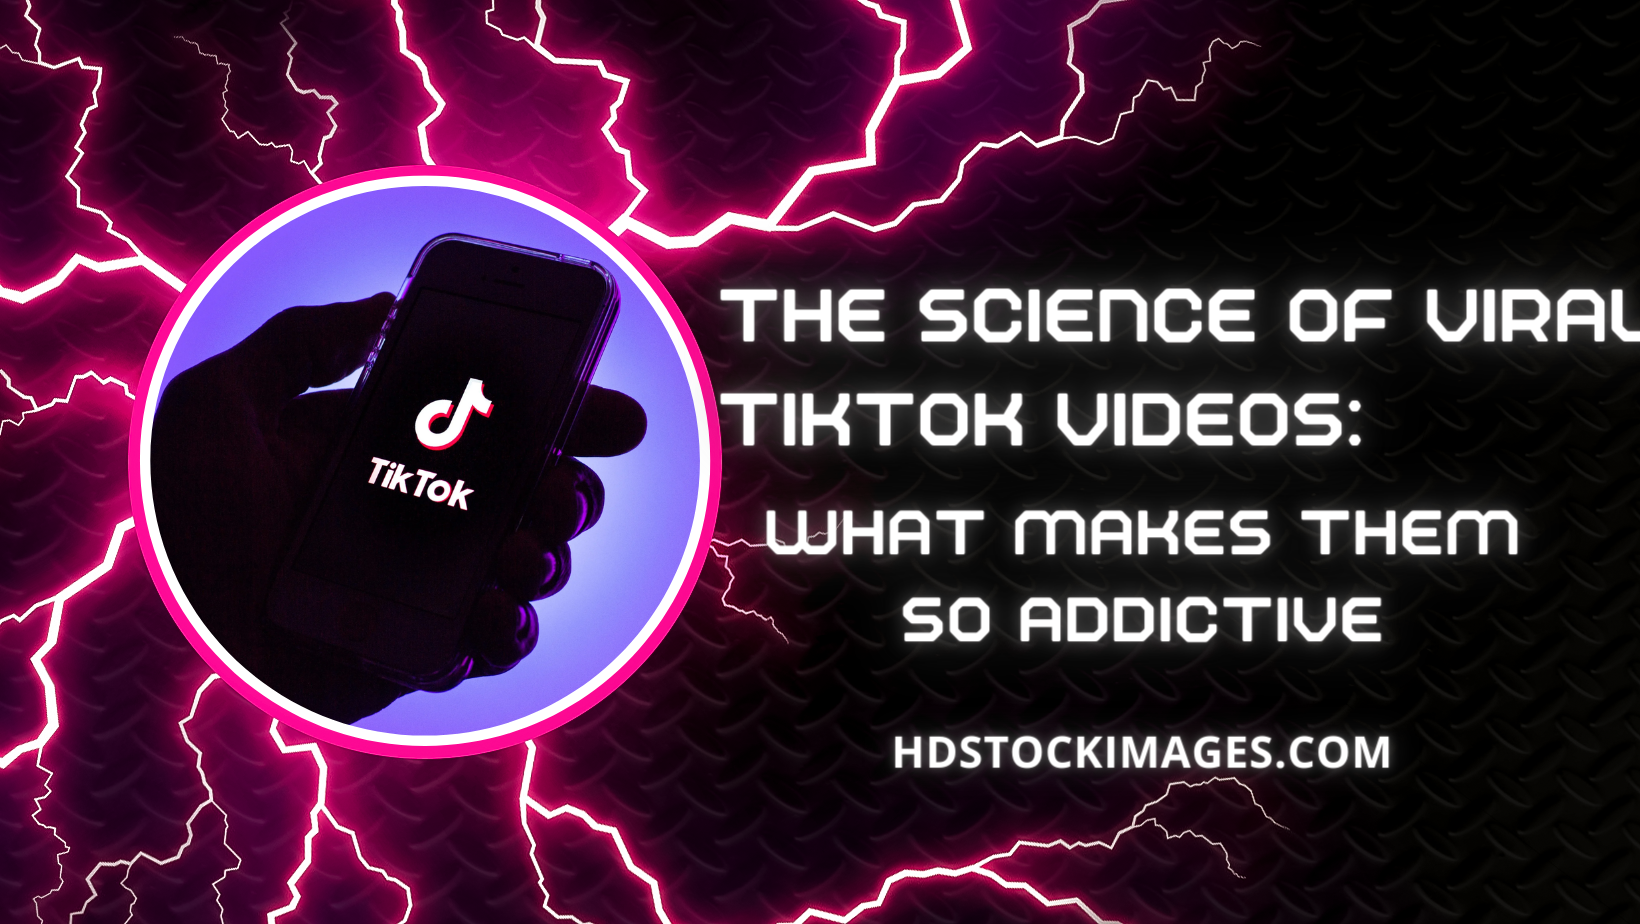 "The Science of Viral TikTok Videos: What Makes Them So Addictive"